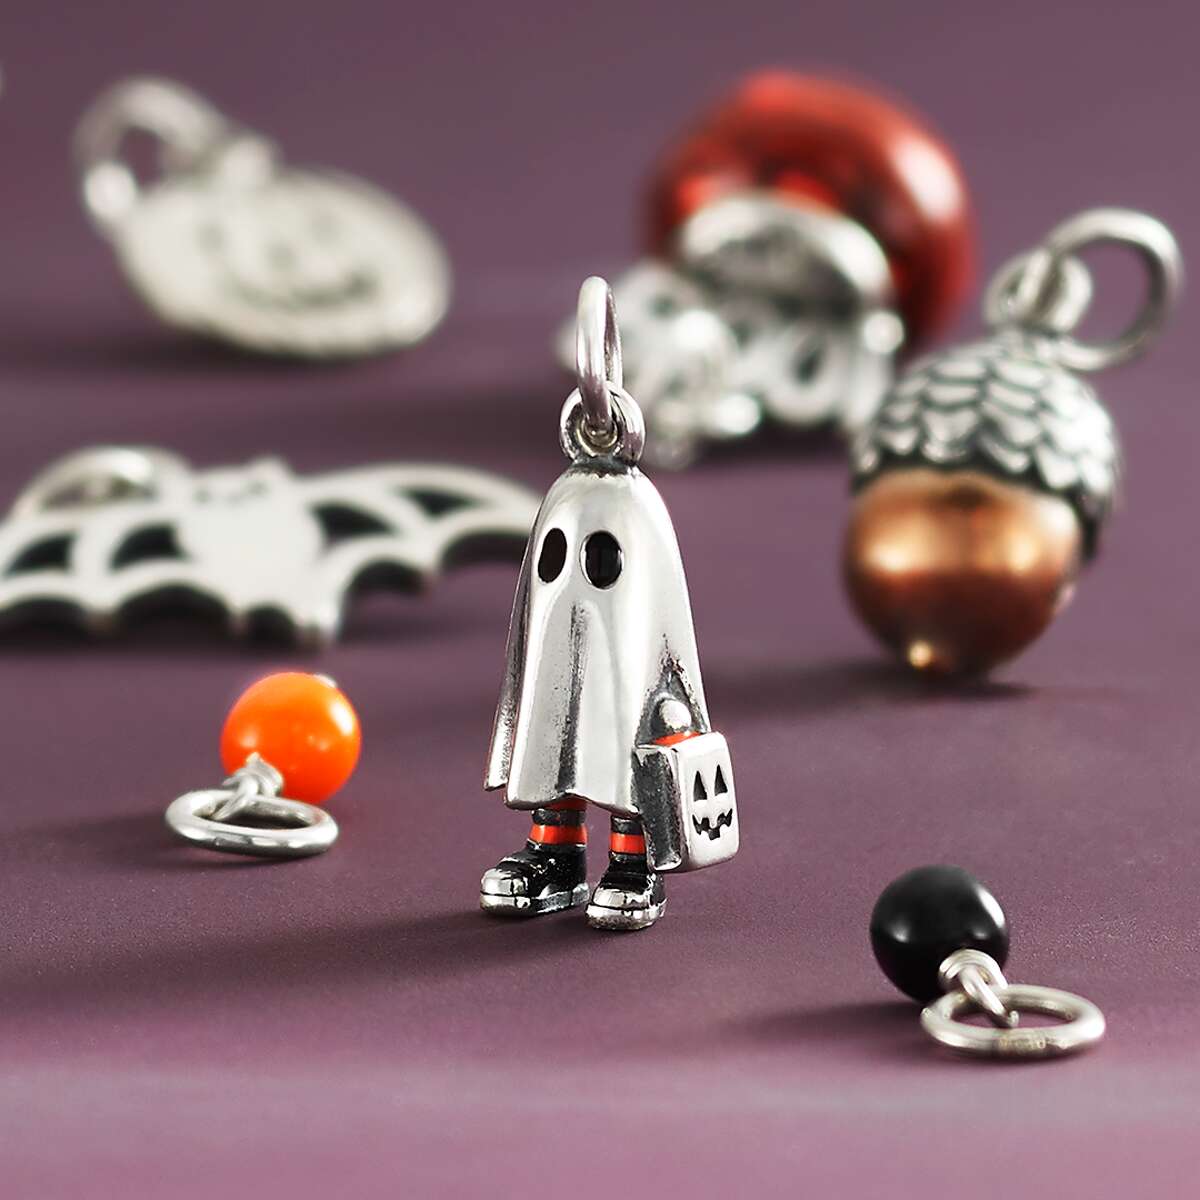 The Kerrville-based jeweler revealed the "Trick or Treater" charm on Thursday, available for purchase online and in stores for $62.